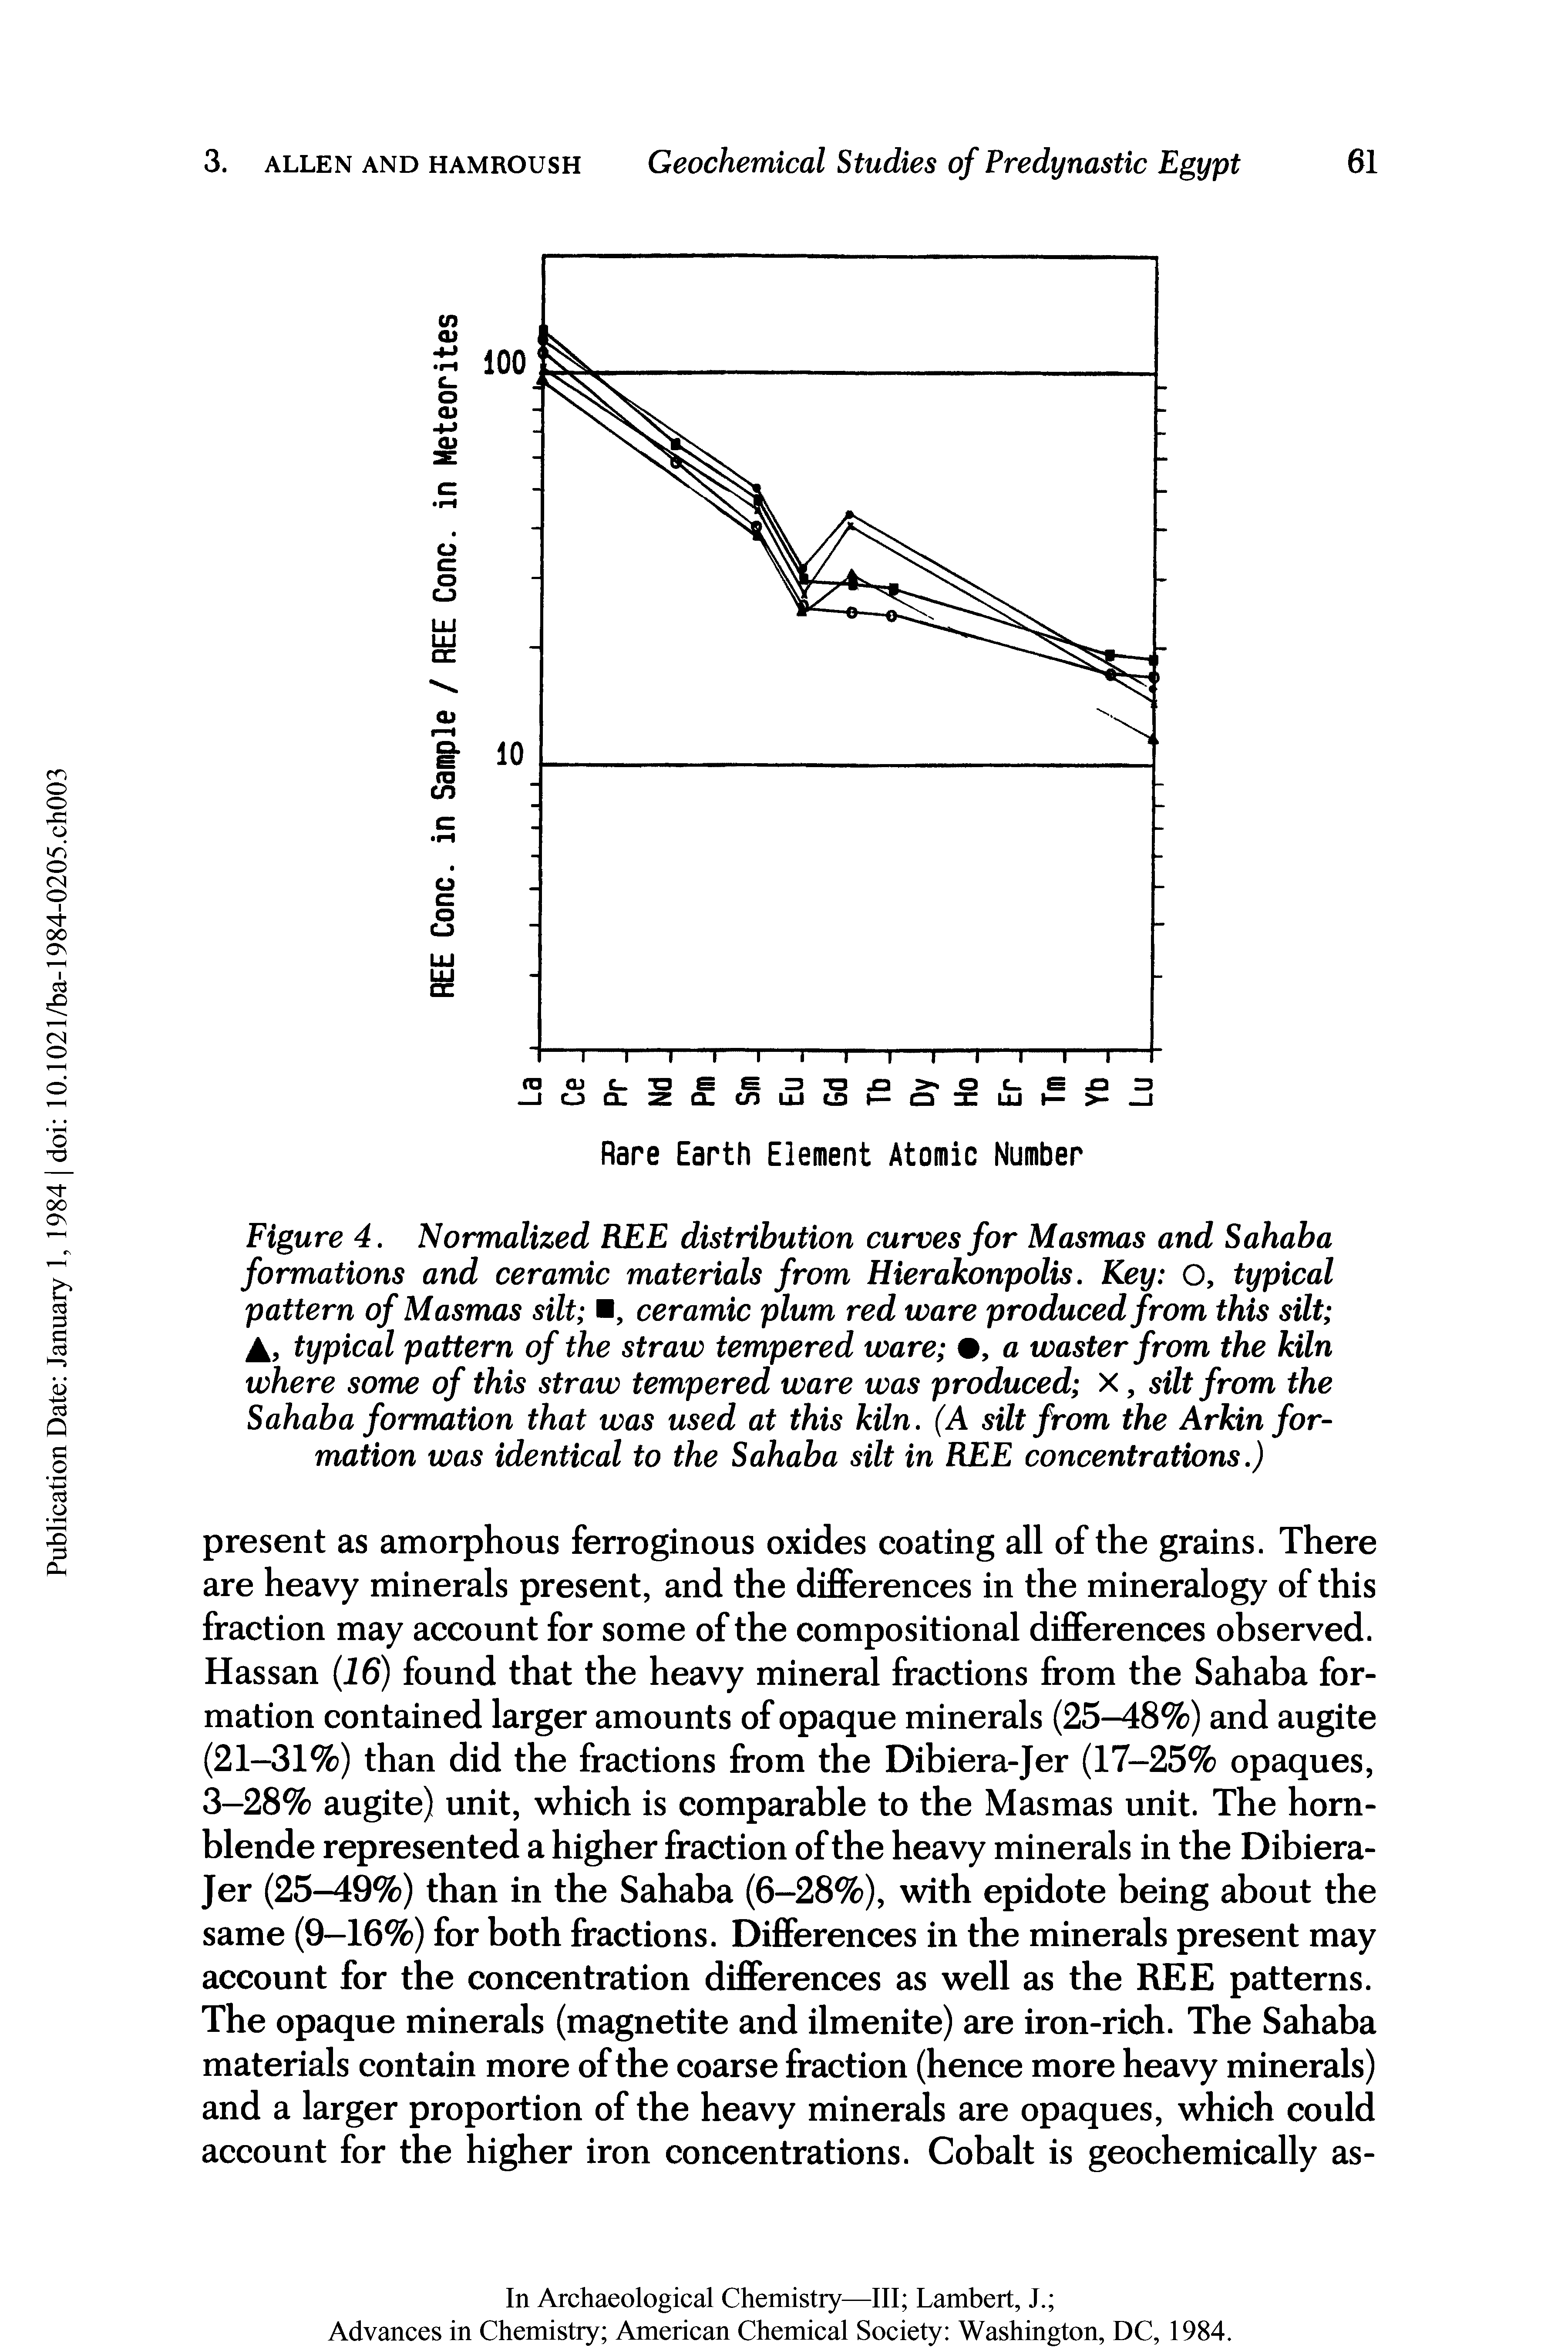 Figure 4. Normalized REE distribution curves for Masmas and Sahaba formations and ceramic materials from Hierakonpolis. Key O, typical pattern of Masmas silt , ceramic plum red ware produced from this silt A, typical pattern of the straw tempered ware , a waster from the kiln where some of this straw tempered ware was produced X, silt from the Sahaba formation that was used at this kiln. (A silt from the Arkin formation was identical to the Sahaba silt in REE concentrations.)...